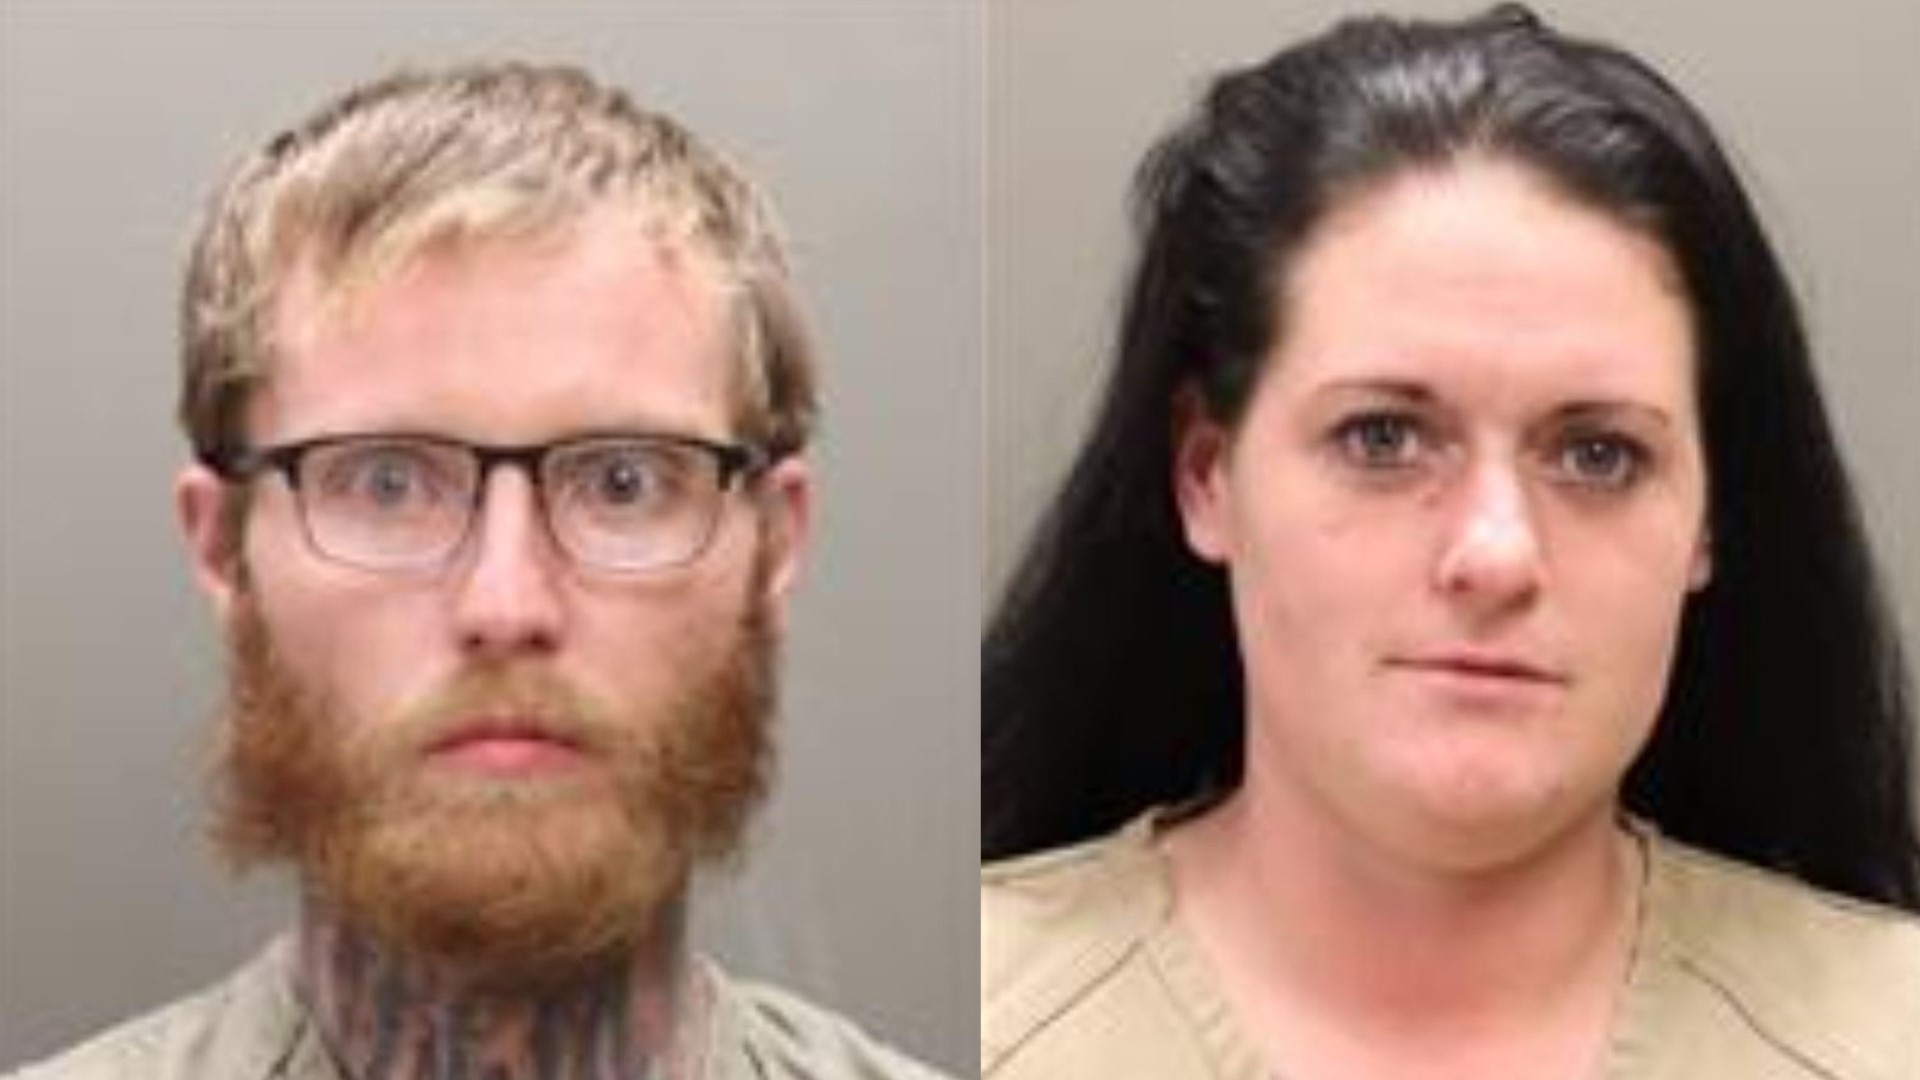 Police wrote in a court filing that Jason Freeman and Lindsey Pyles both ran from their vehicle after a pursuit on Interstate 270 last week.